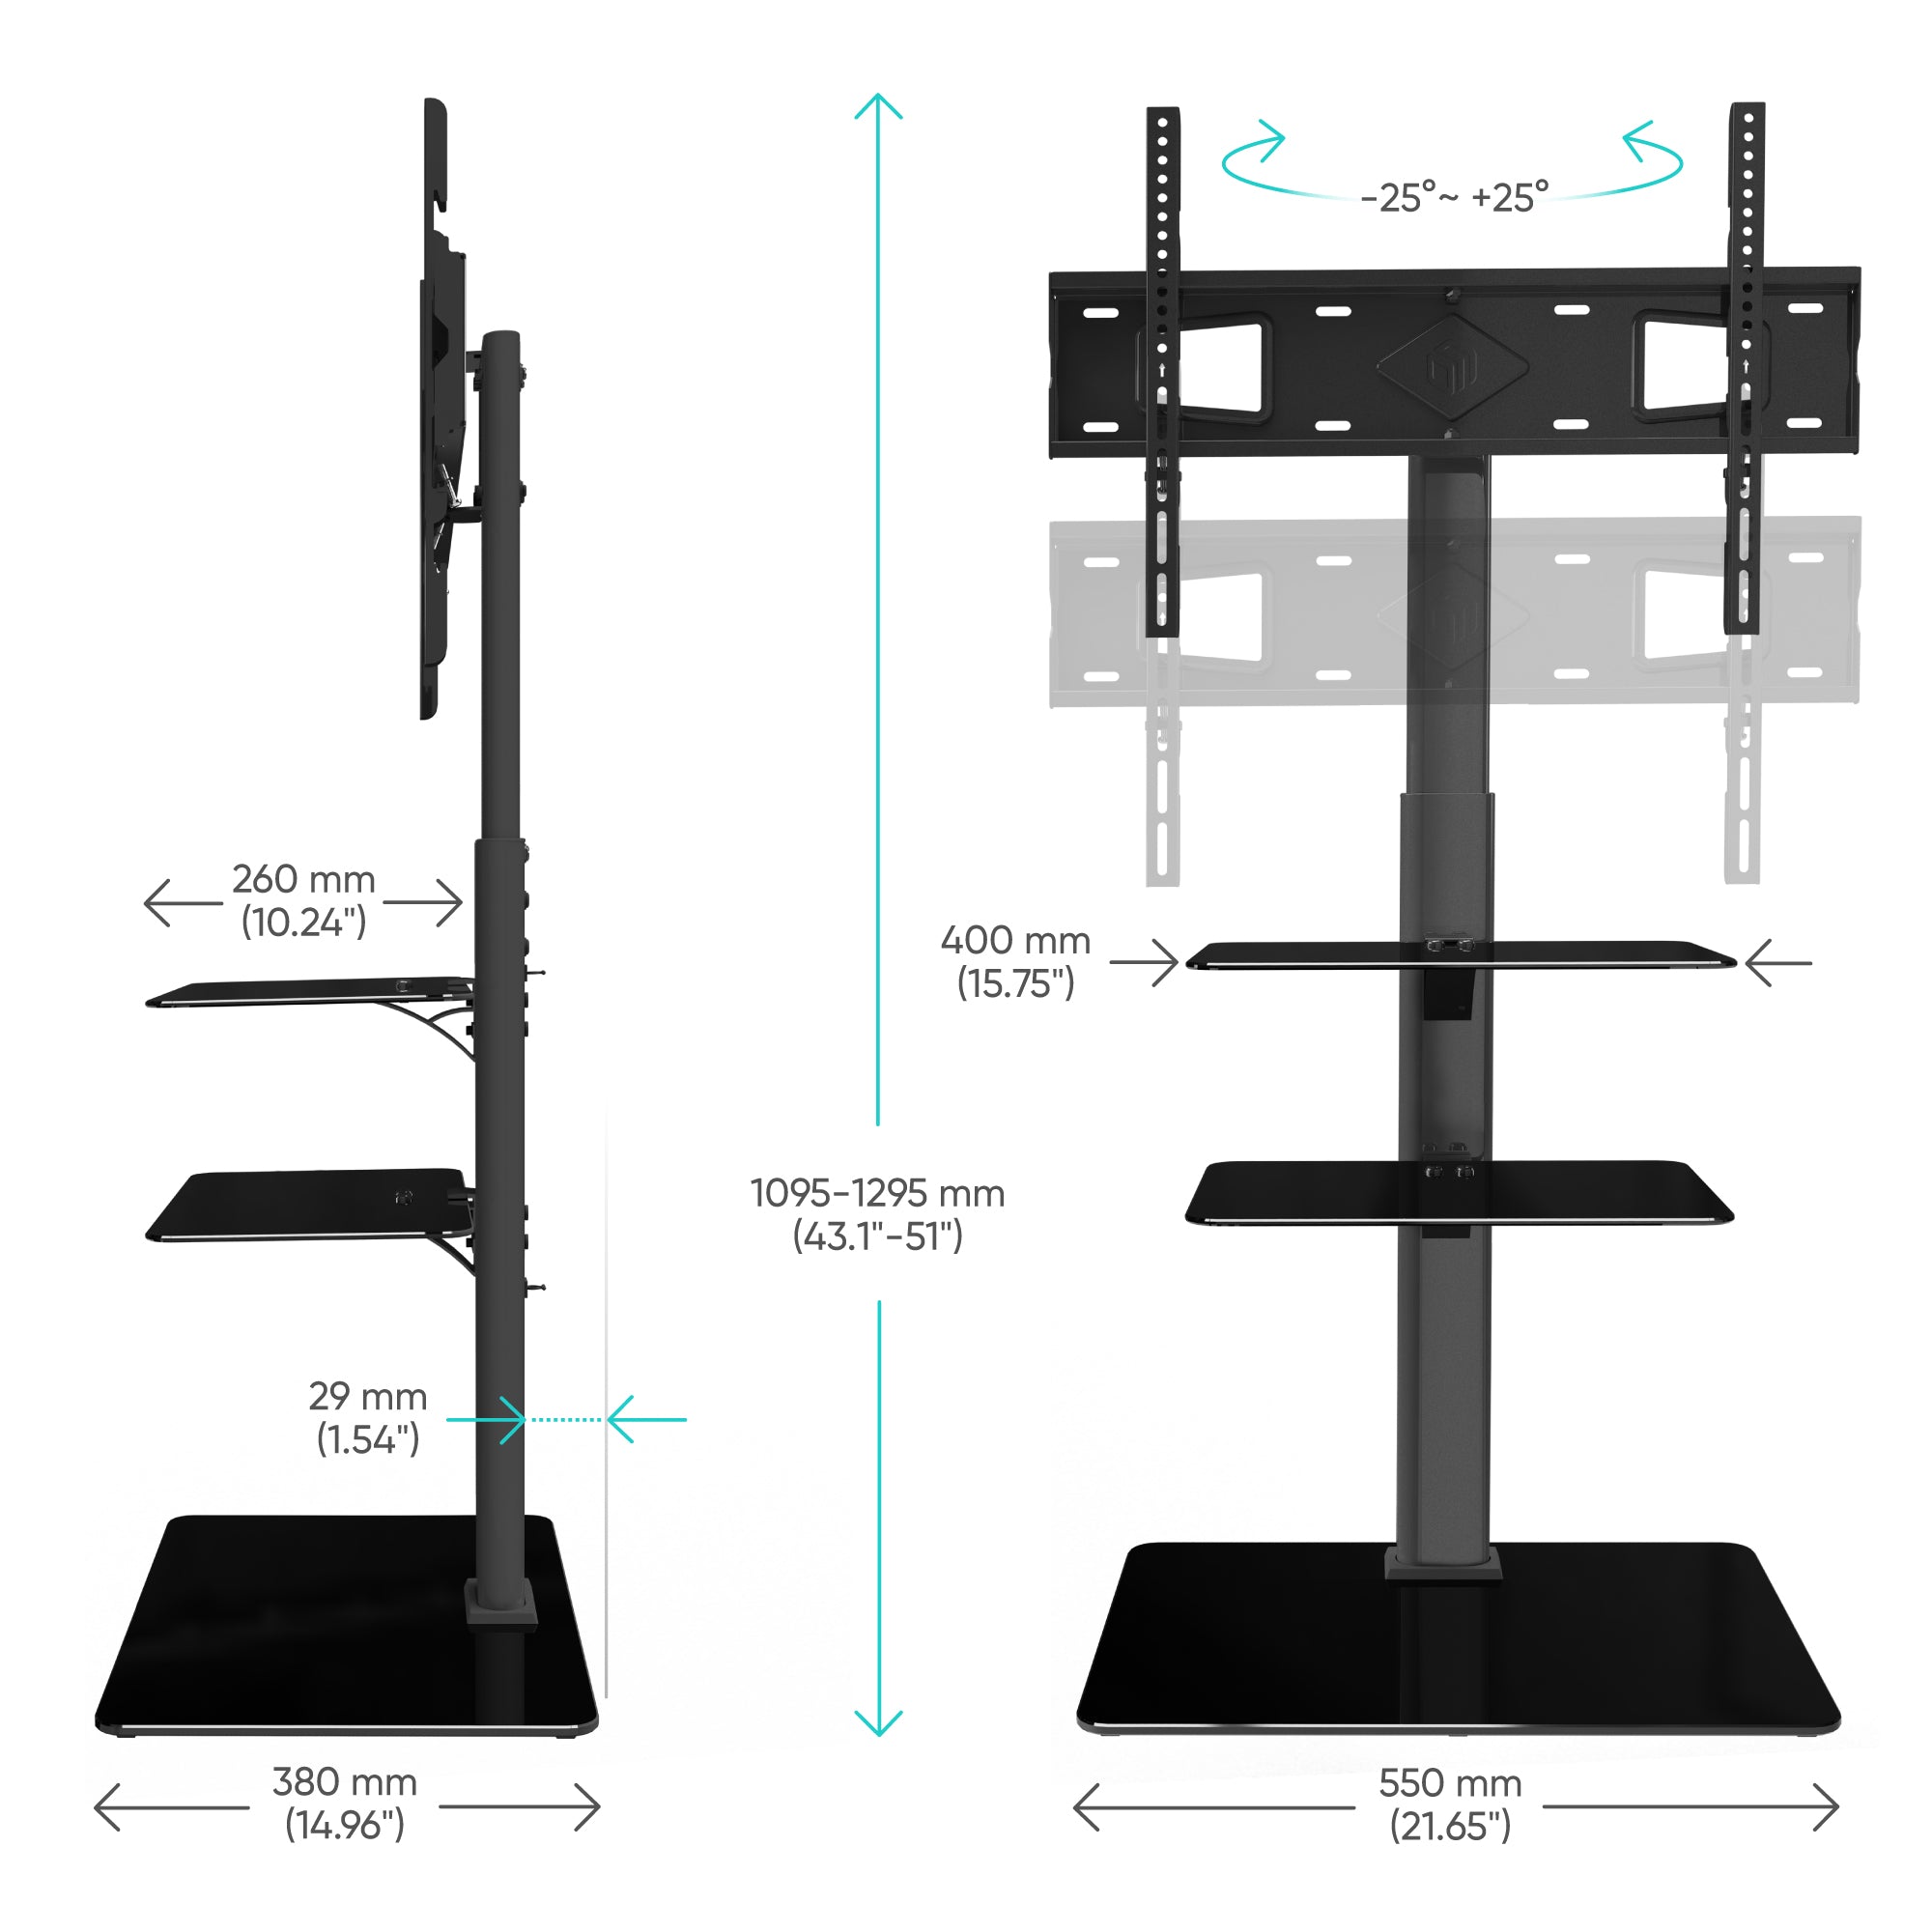 Universal Floor TV Stand Glass Base and Shelves for 32-65" TVs up to 66 lbs ONKRON TS5550, Black